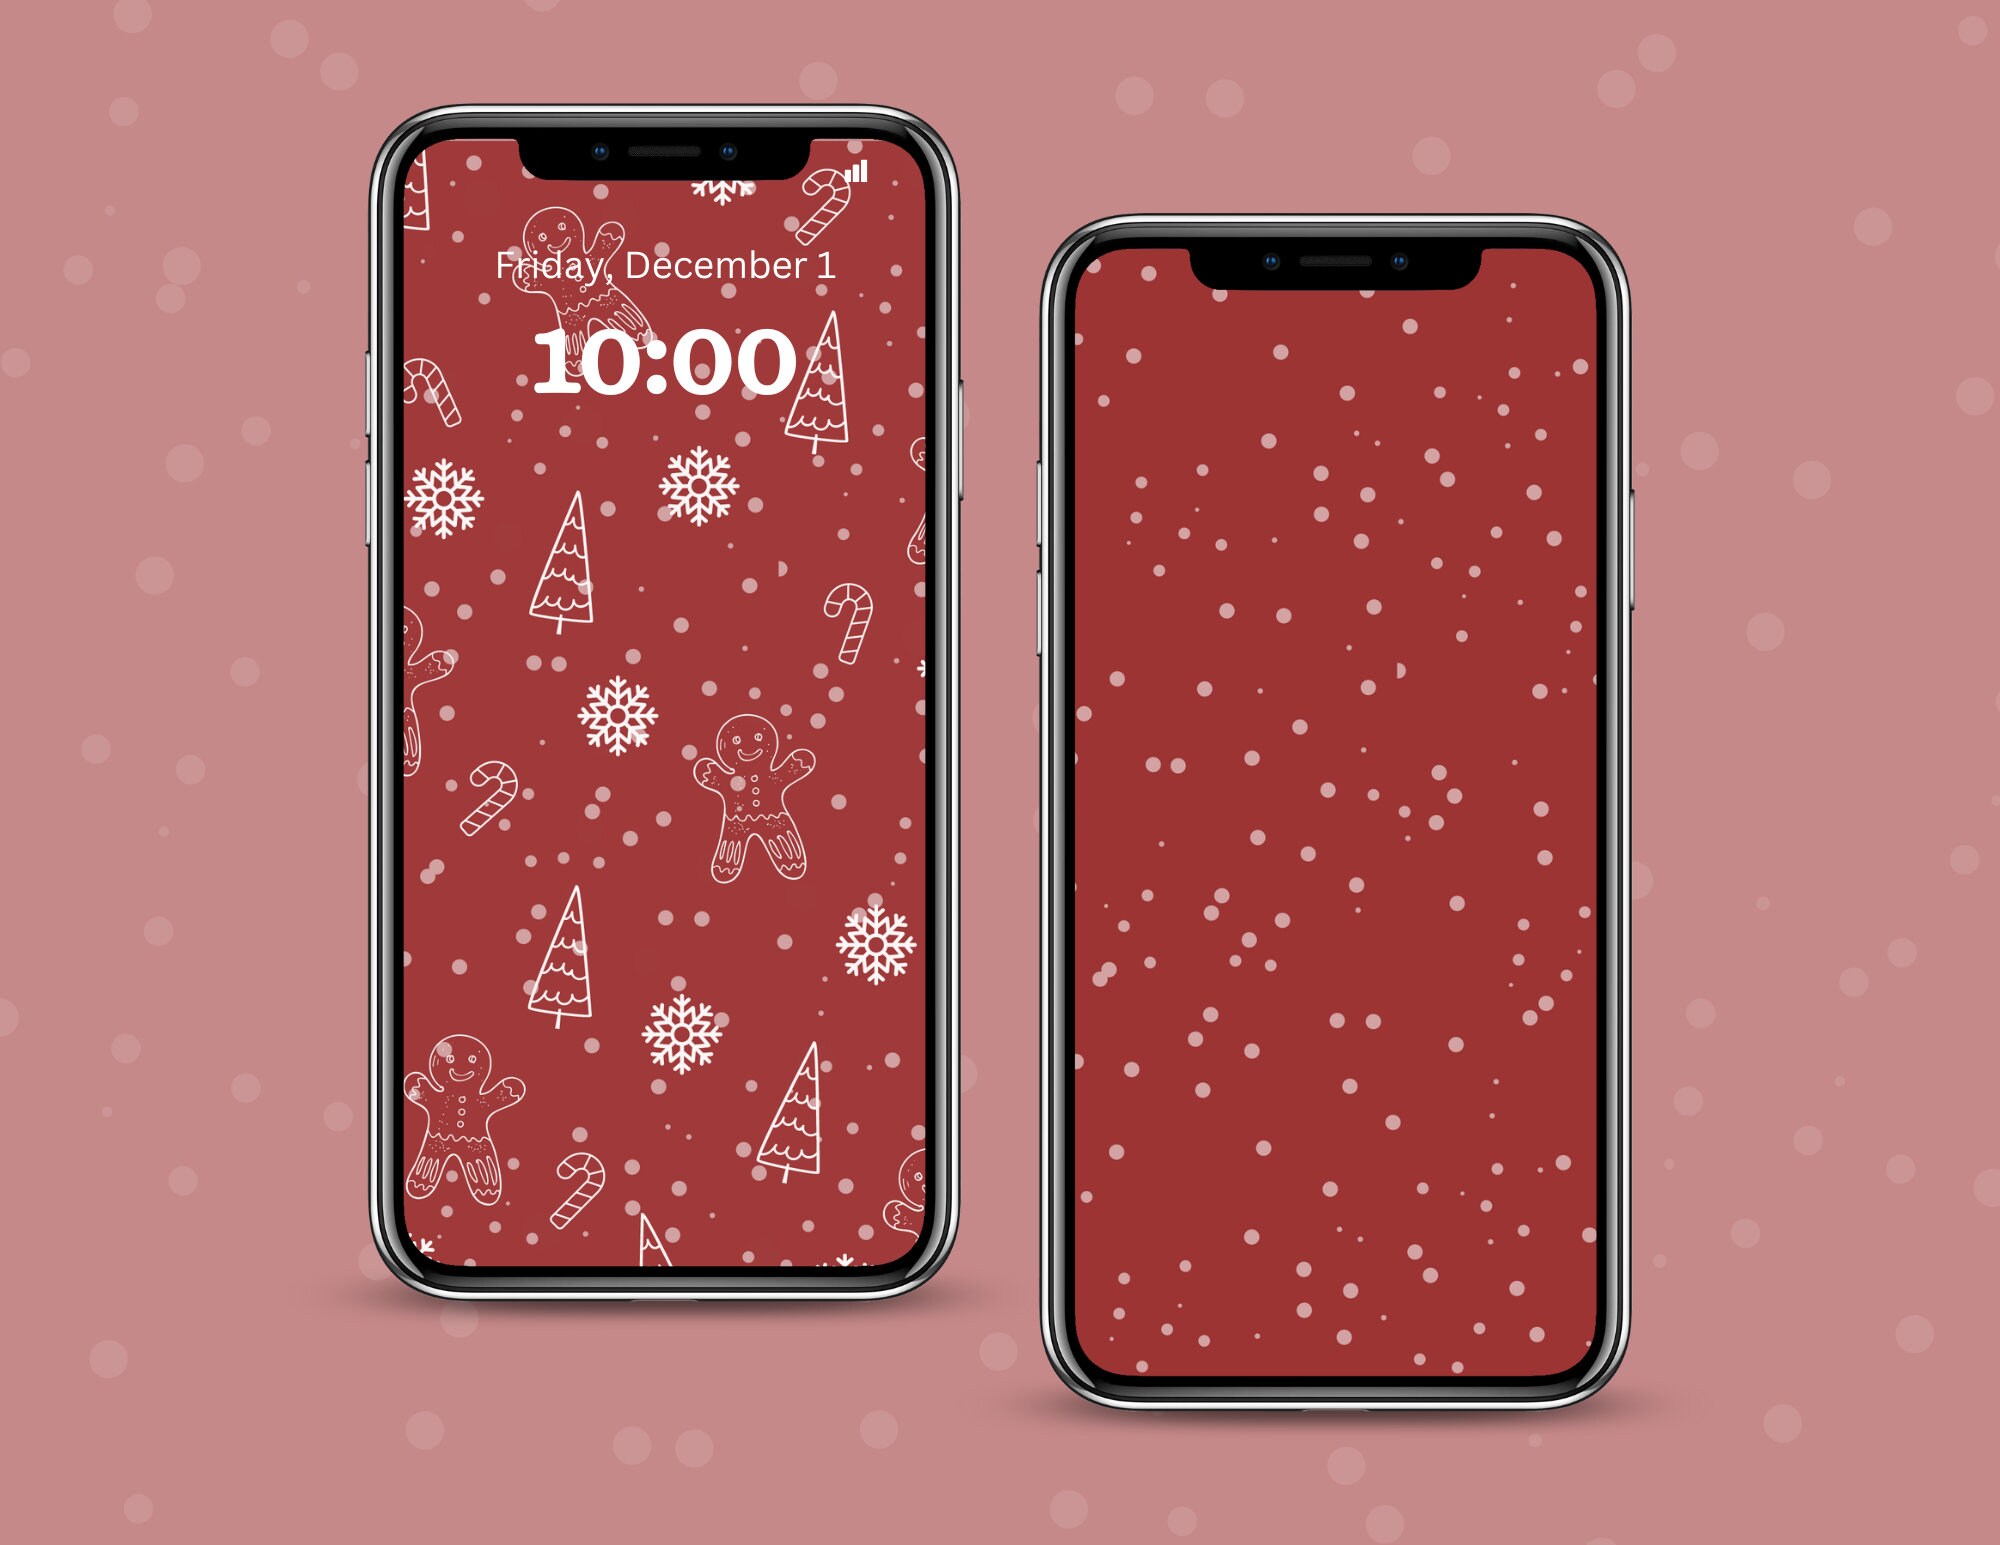 Red Gingerbread Holiday Iphone Wallpaper Simple Modern - Etsy